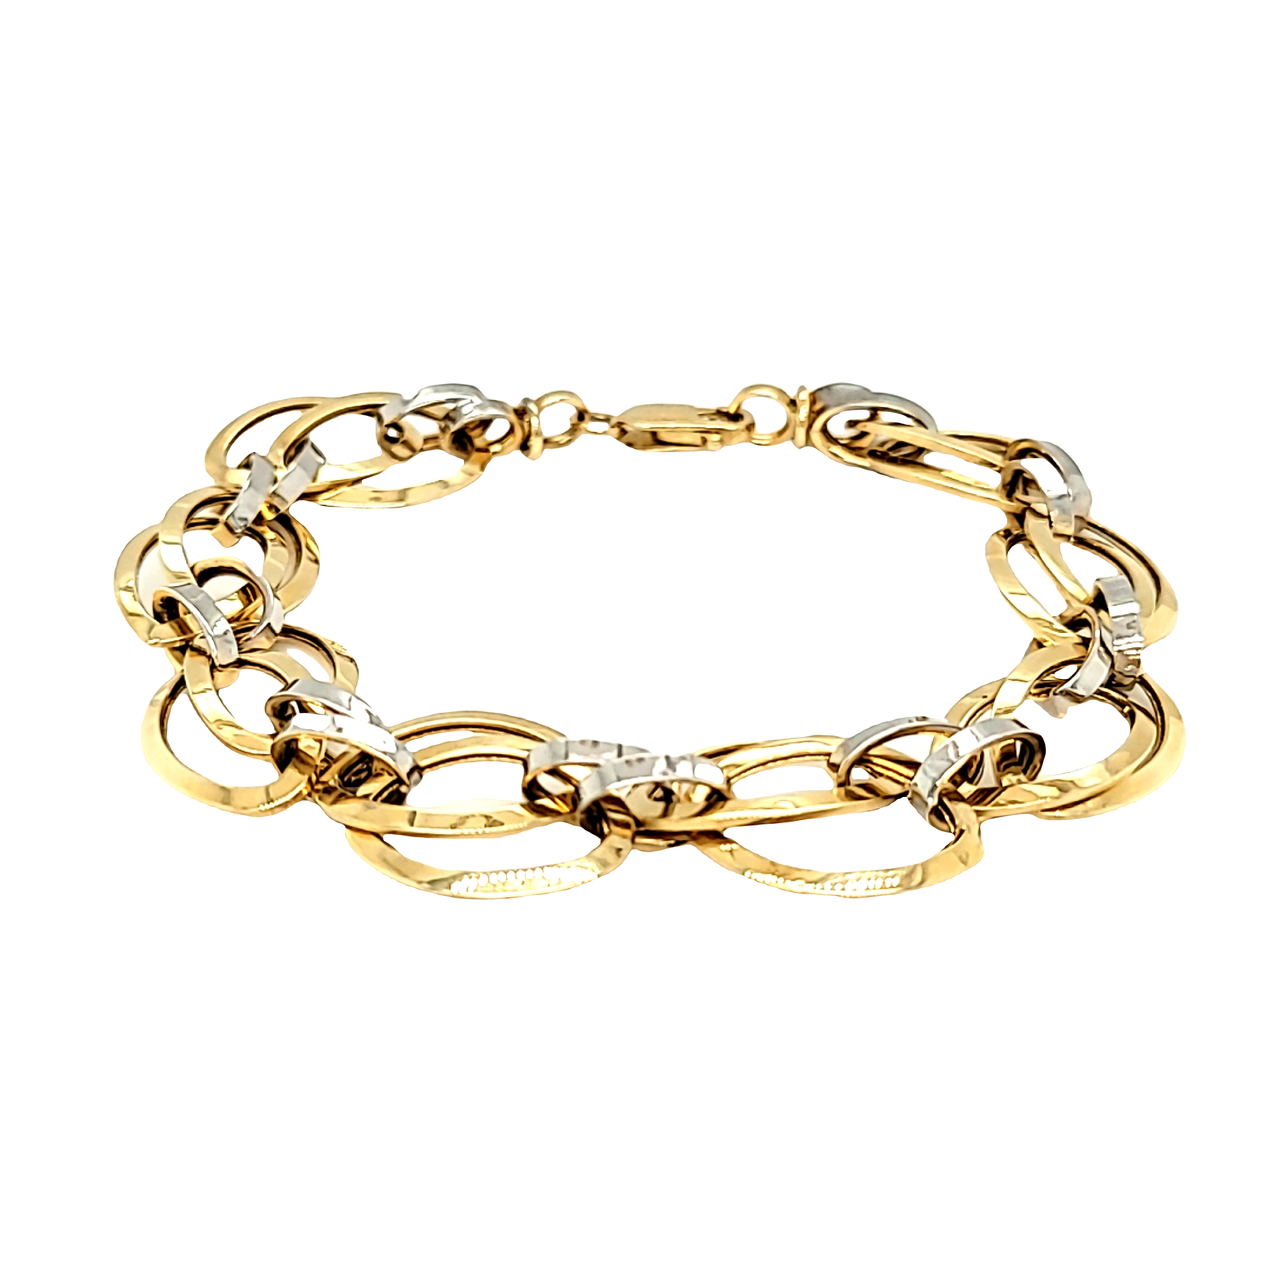 Exclusive 22kt yellow gold custom stylish double link chain design flexible  bracelet, best gift unisex personalized gold fancy jewelry br45 | TRIBAL  ORNAMENTS